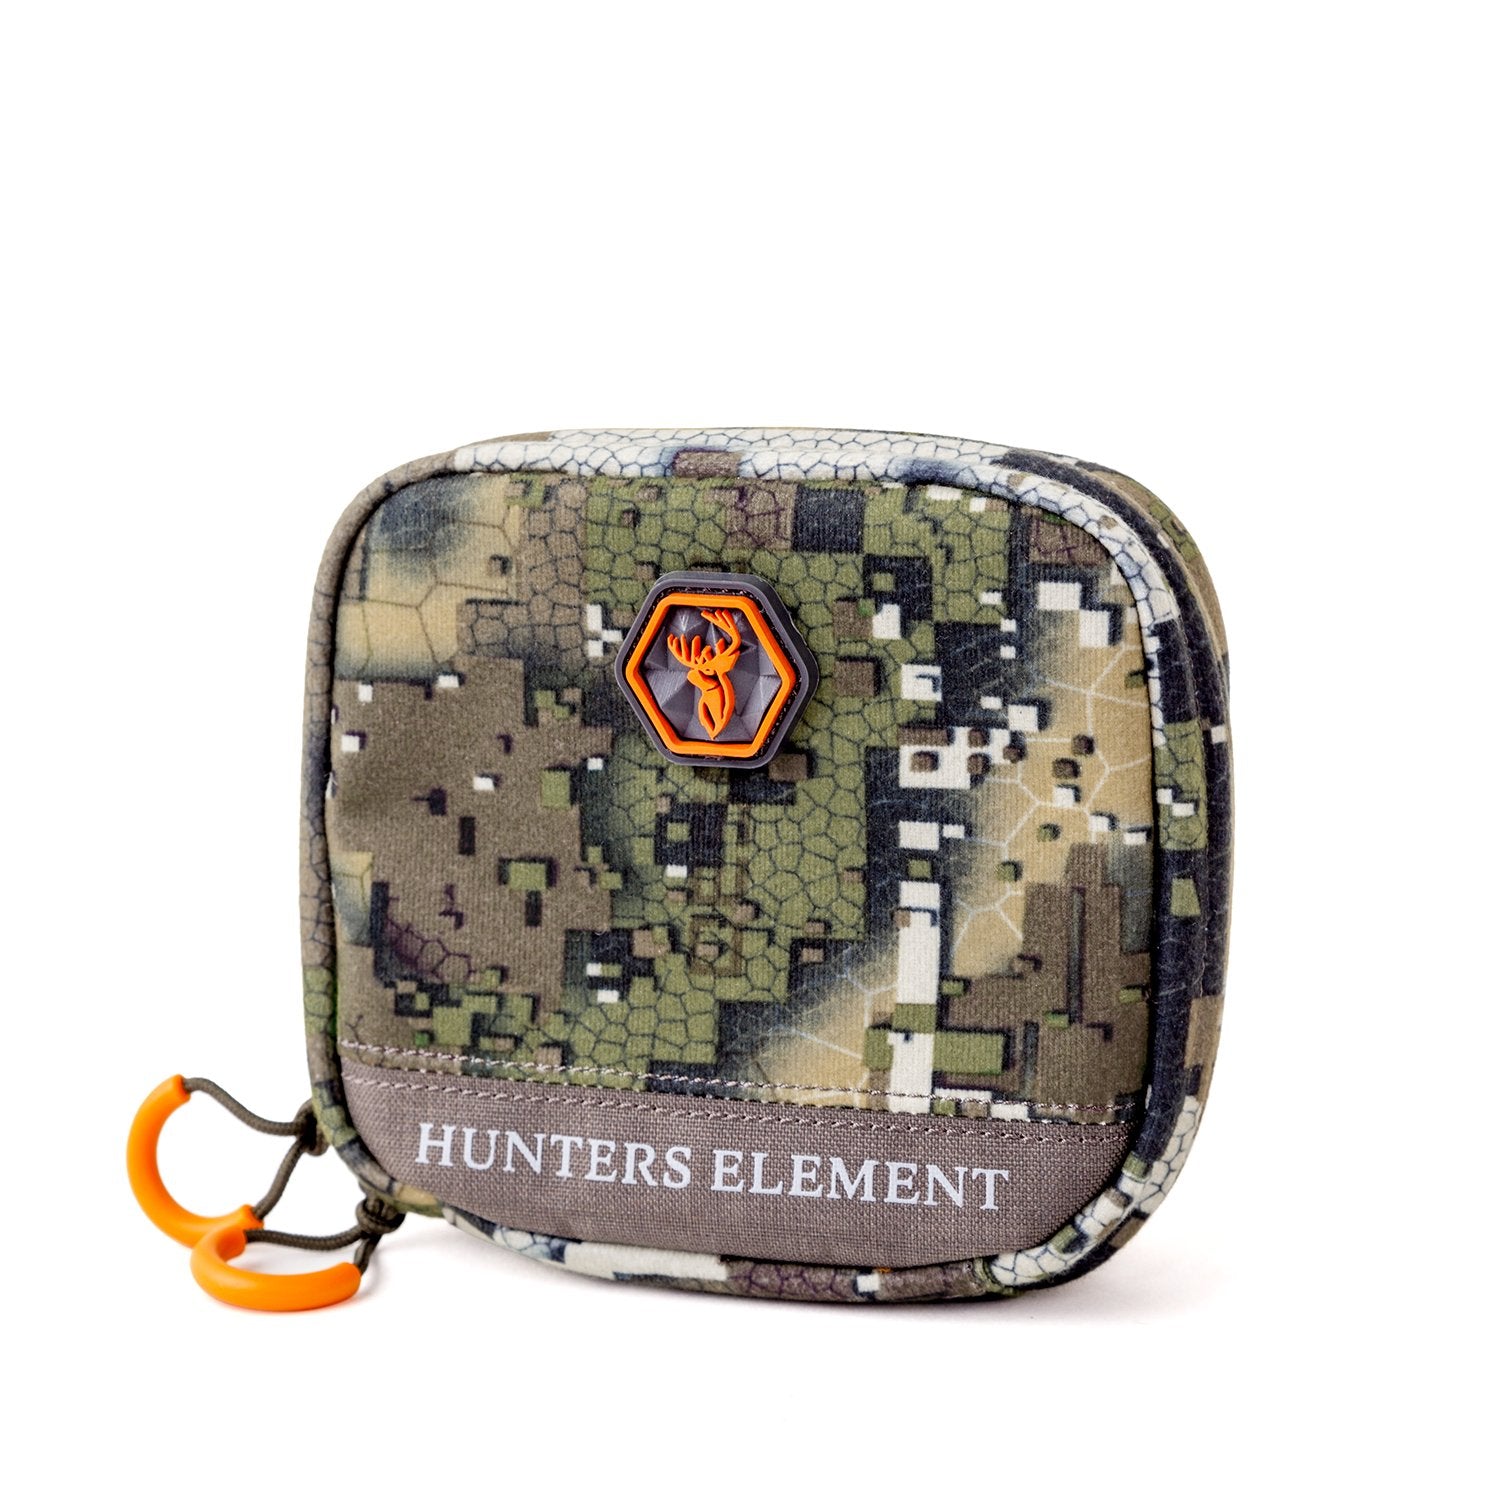 Hunters Element Velocity Ammo Pouch Desolve Veil Medium - M - Mansfield Hunting & Fishing - Products to prepare for Corona Virus